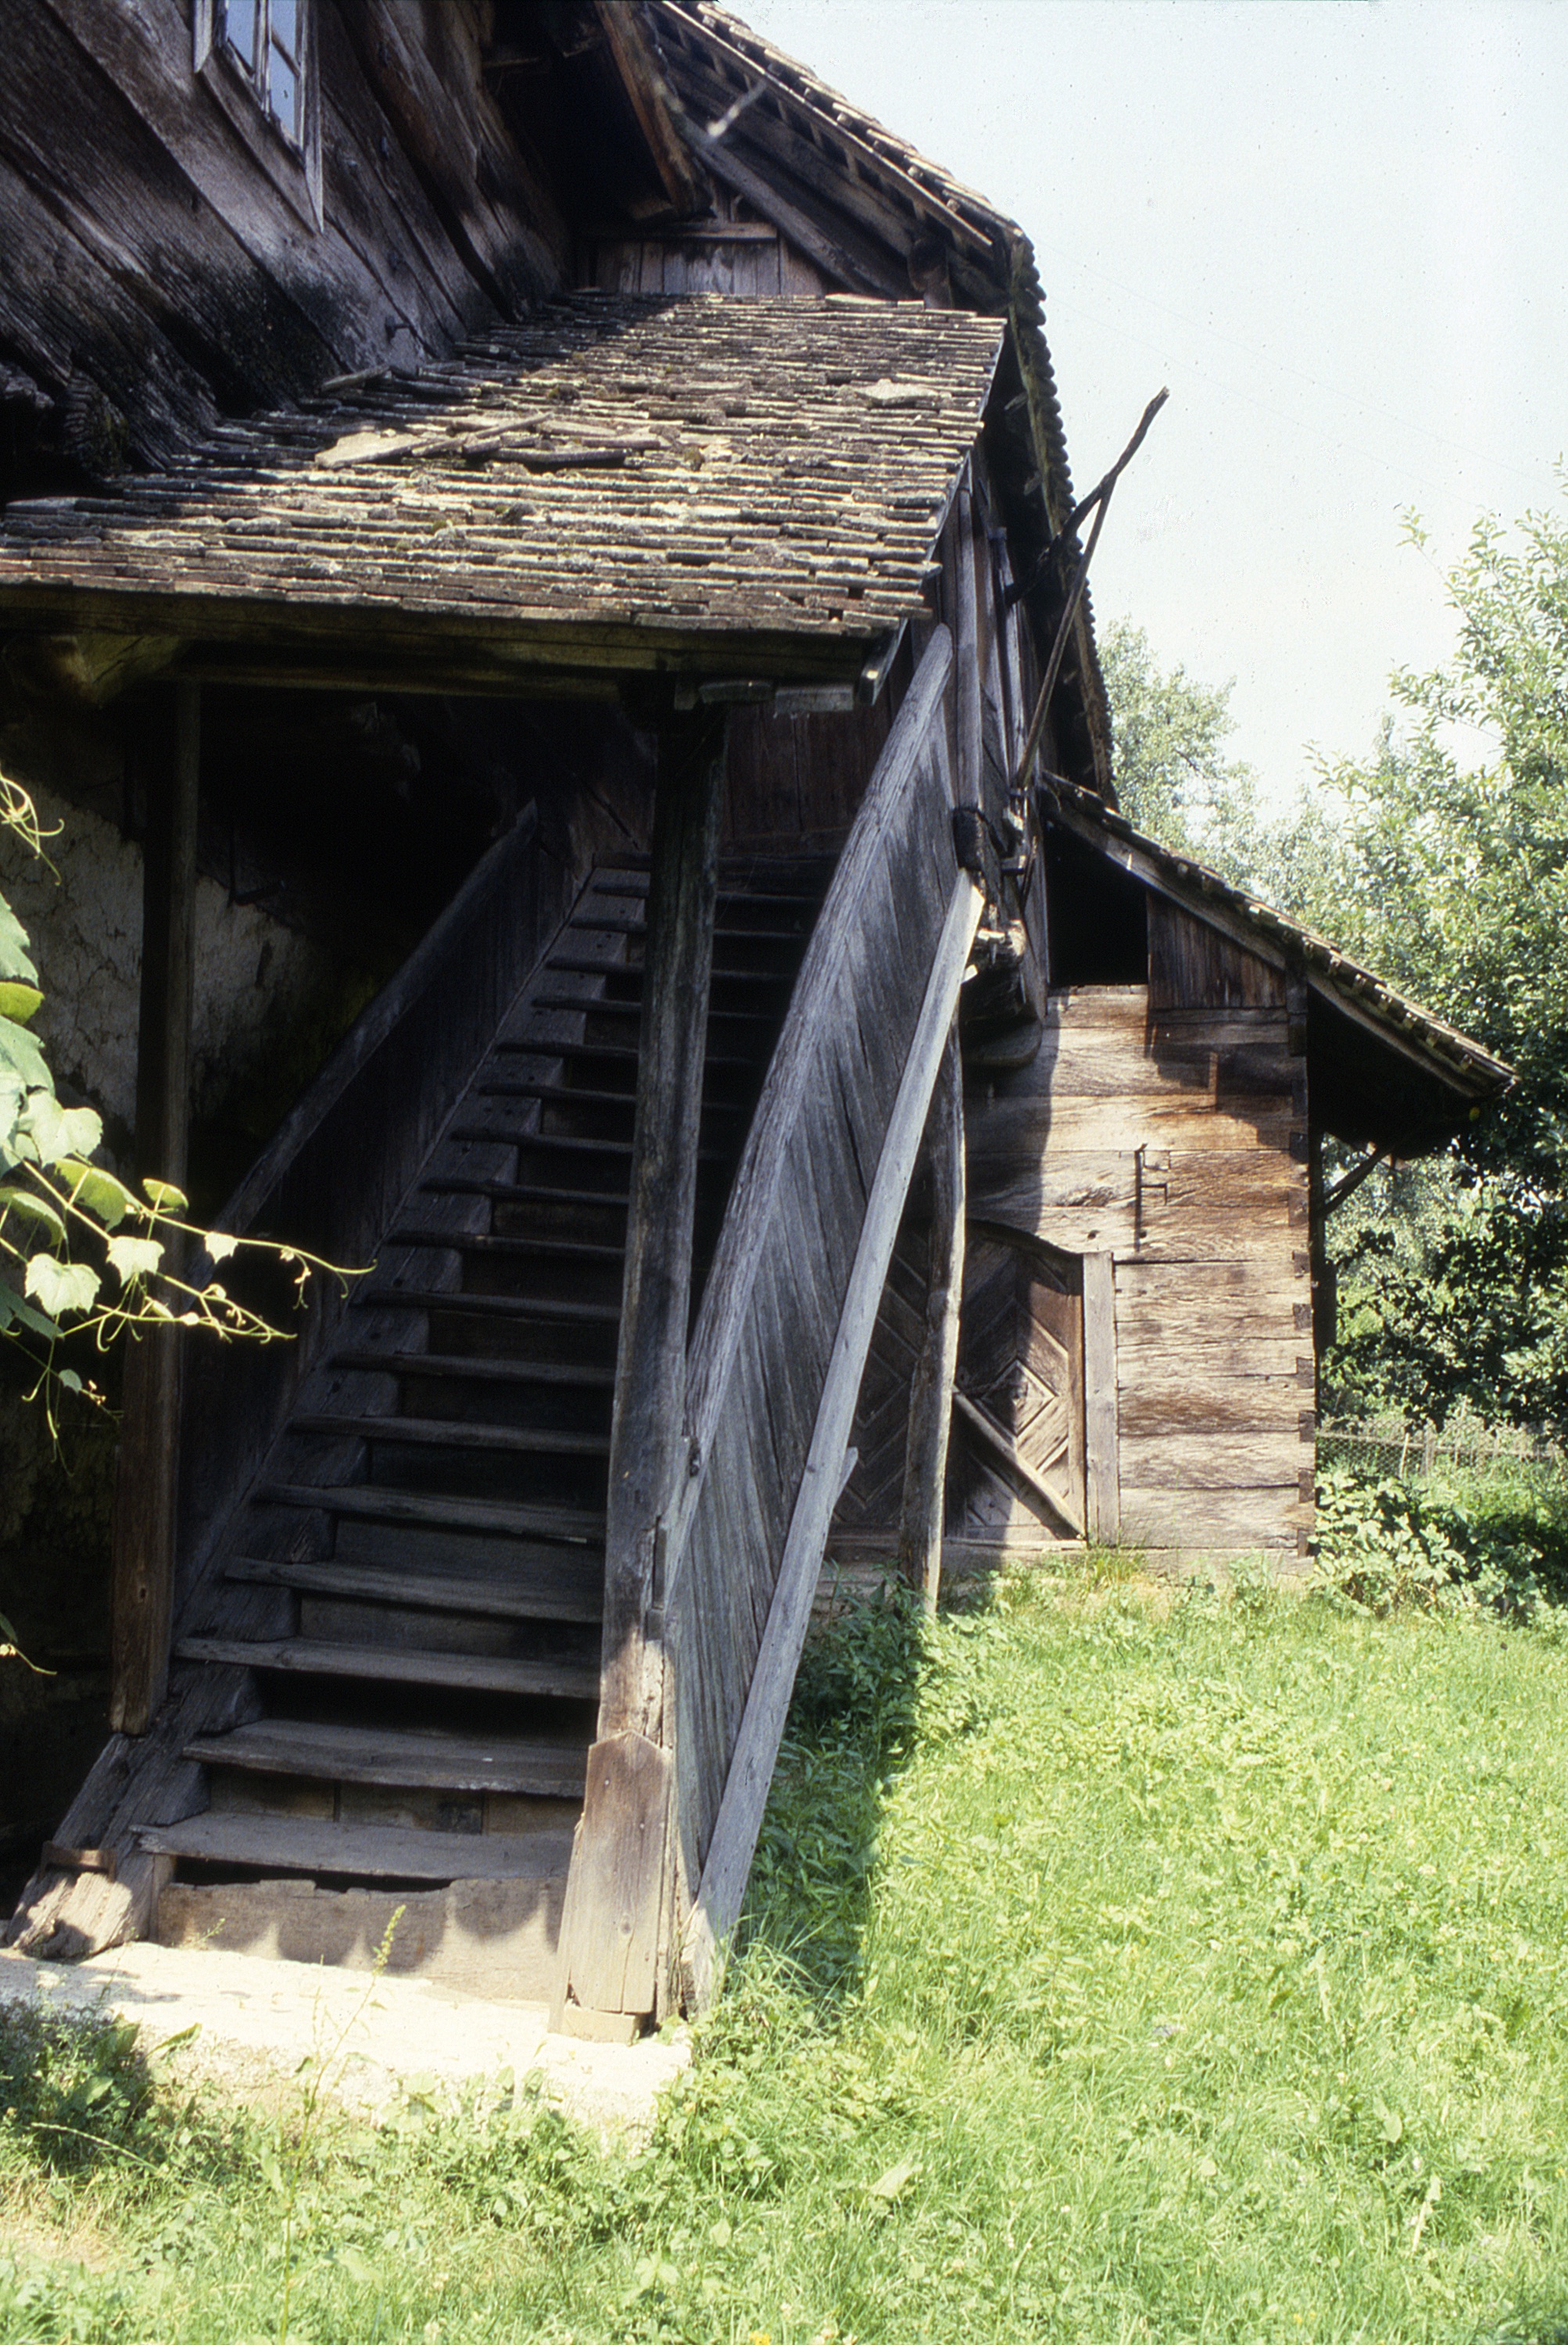 <p>Covered wooden stairways lead to the upper level living quarters of the čardak dwellings of the Turopolje and Pokuplje regions, a distinguishing feature of this vernacular building type. The two timber stair stringers were notched to accept the wooden treads and a rail set on the outer stringer to give additional shelter during inclement weather.</p><p>The house was uninhabited and deteriorating in 1988, but planned for eventual restoration as a folk museum.</p><p>(photo 1988)</p>